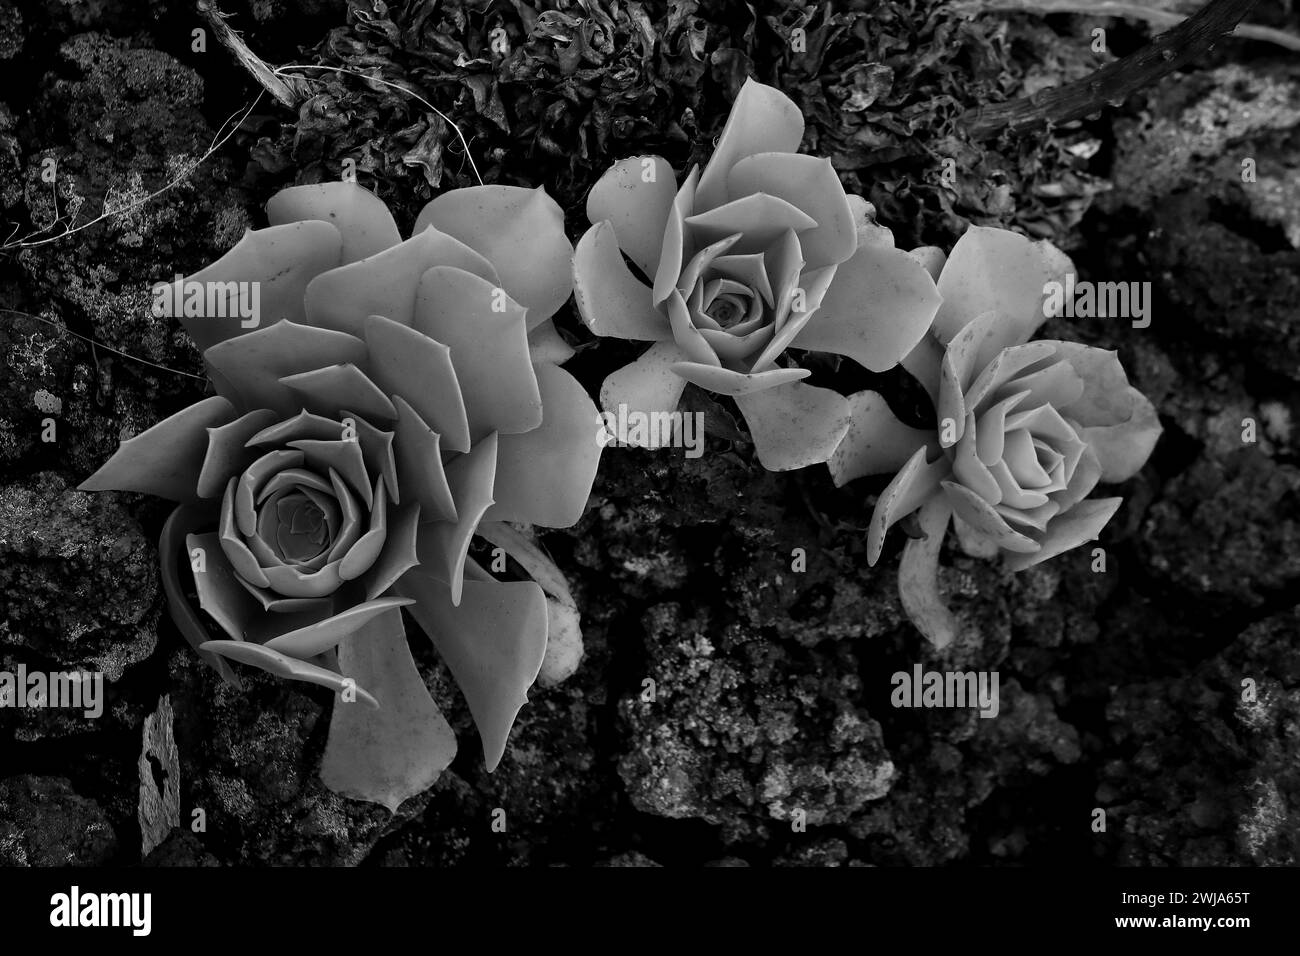 A group of succulents exhibiting intricate rosette patterns captured in a black and white photograph Stock Photo